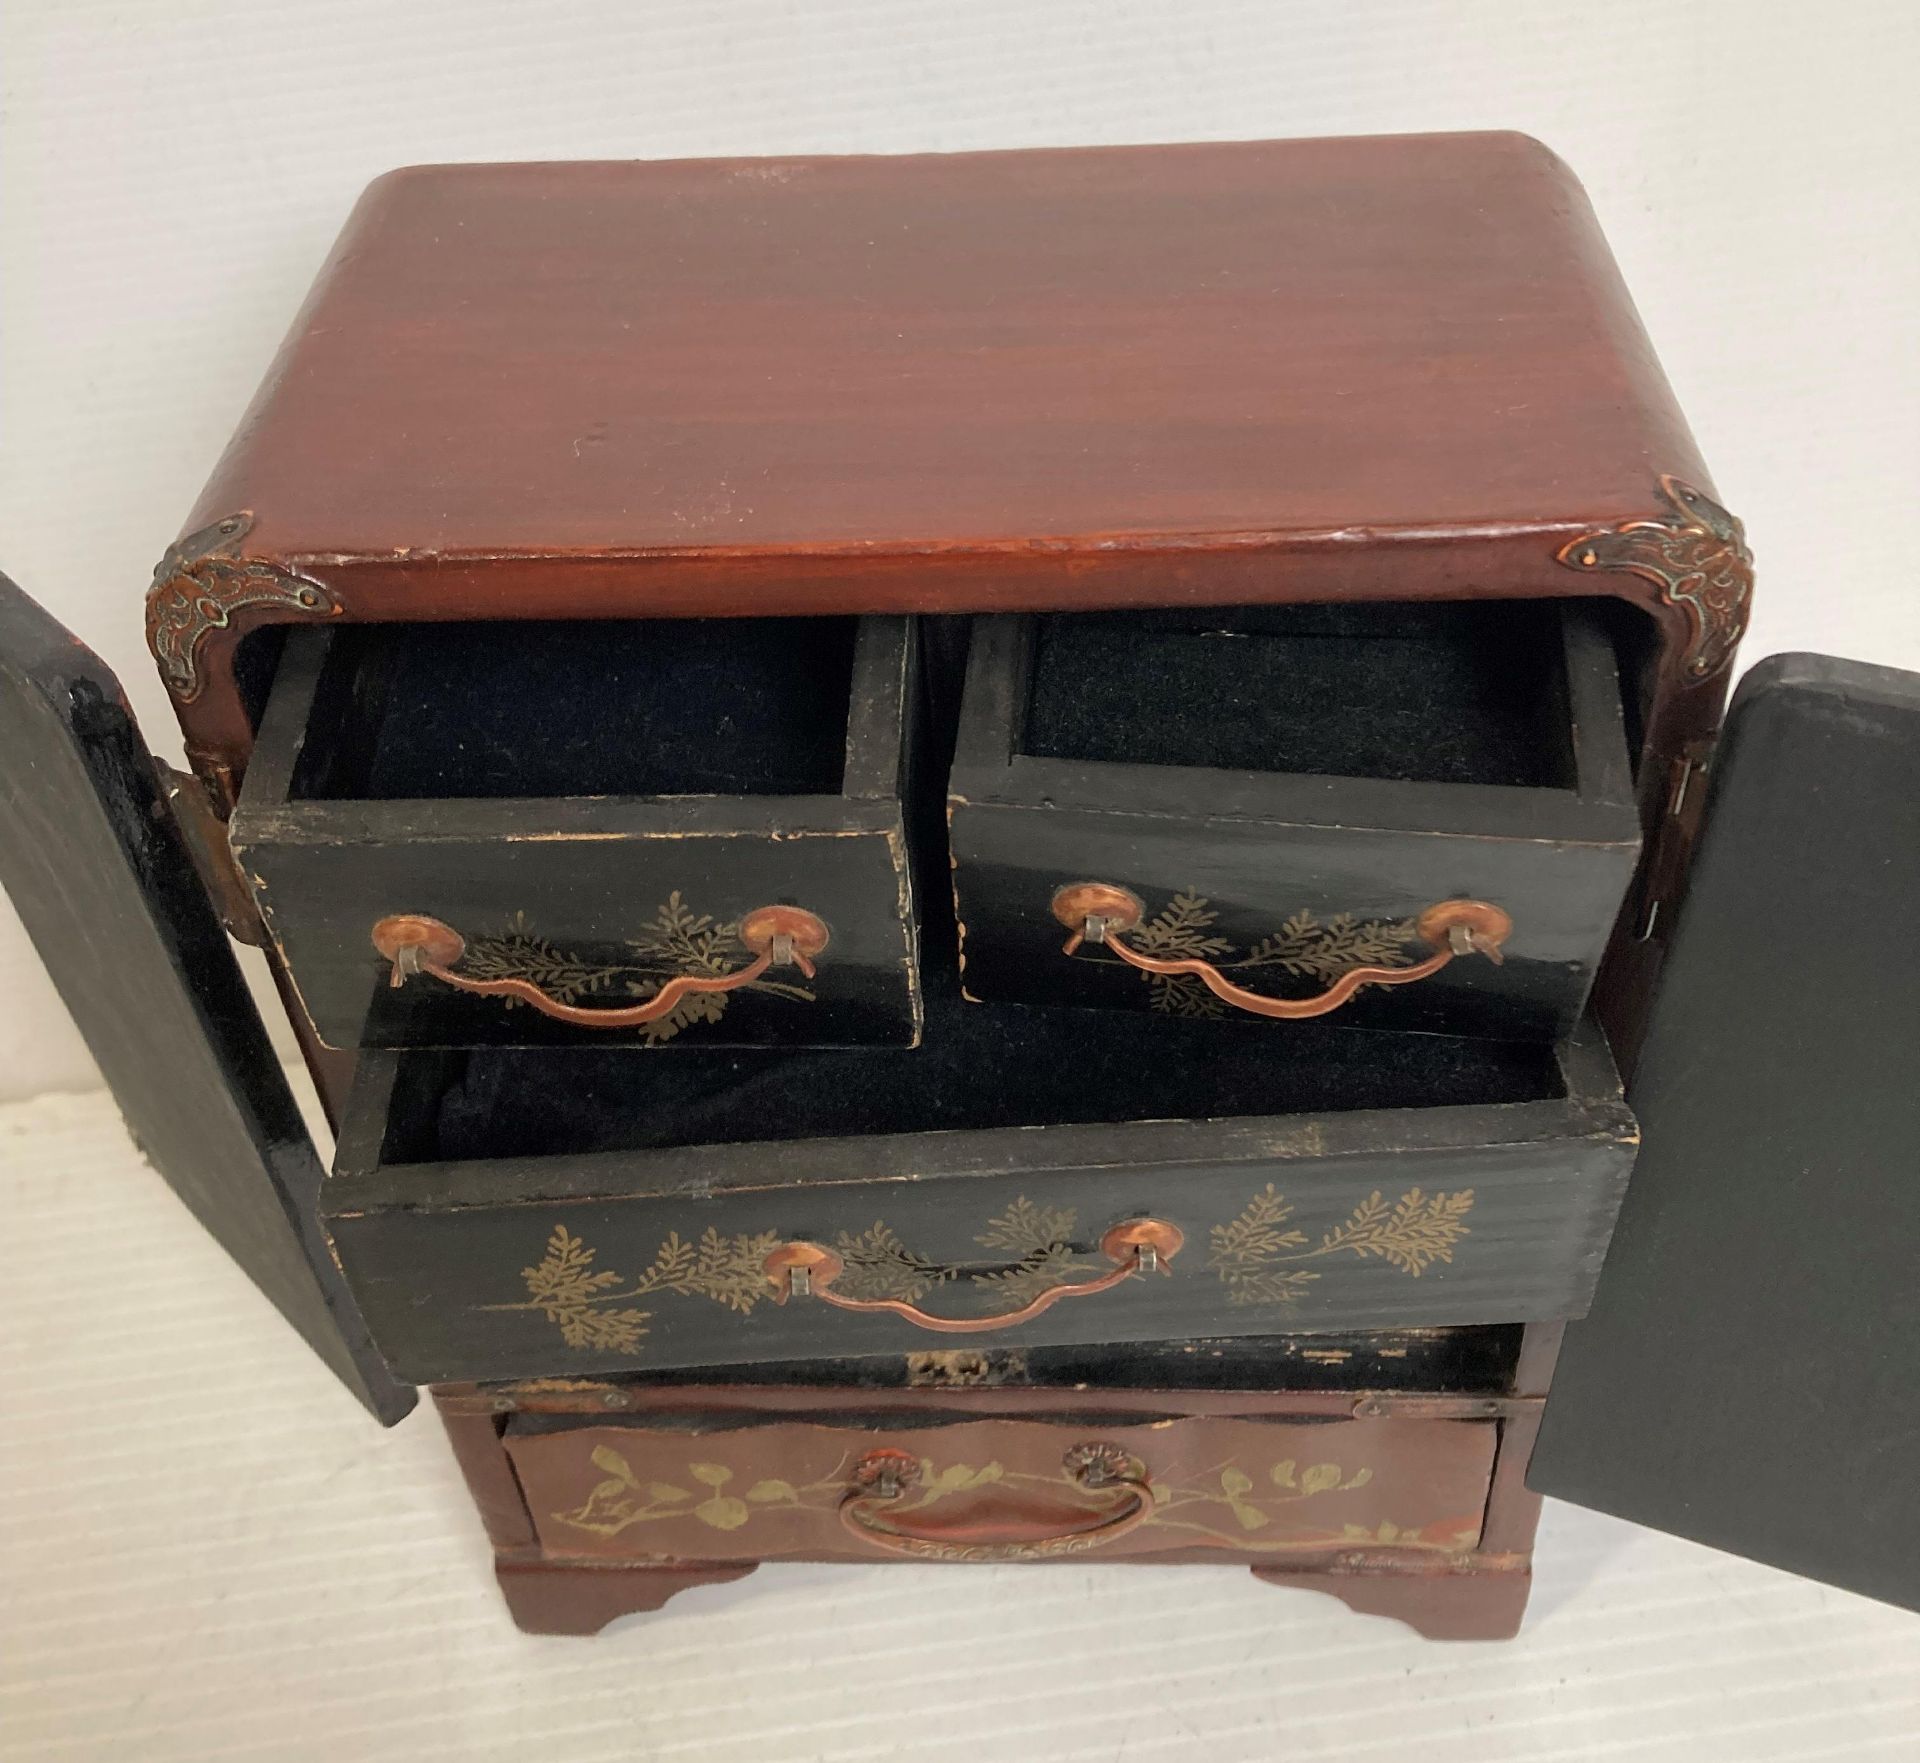 Two assorted Oriental boxes and two wooden circular stands (saleroom location: S2 QB14) - Image 7 of 8